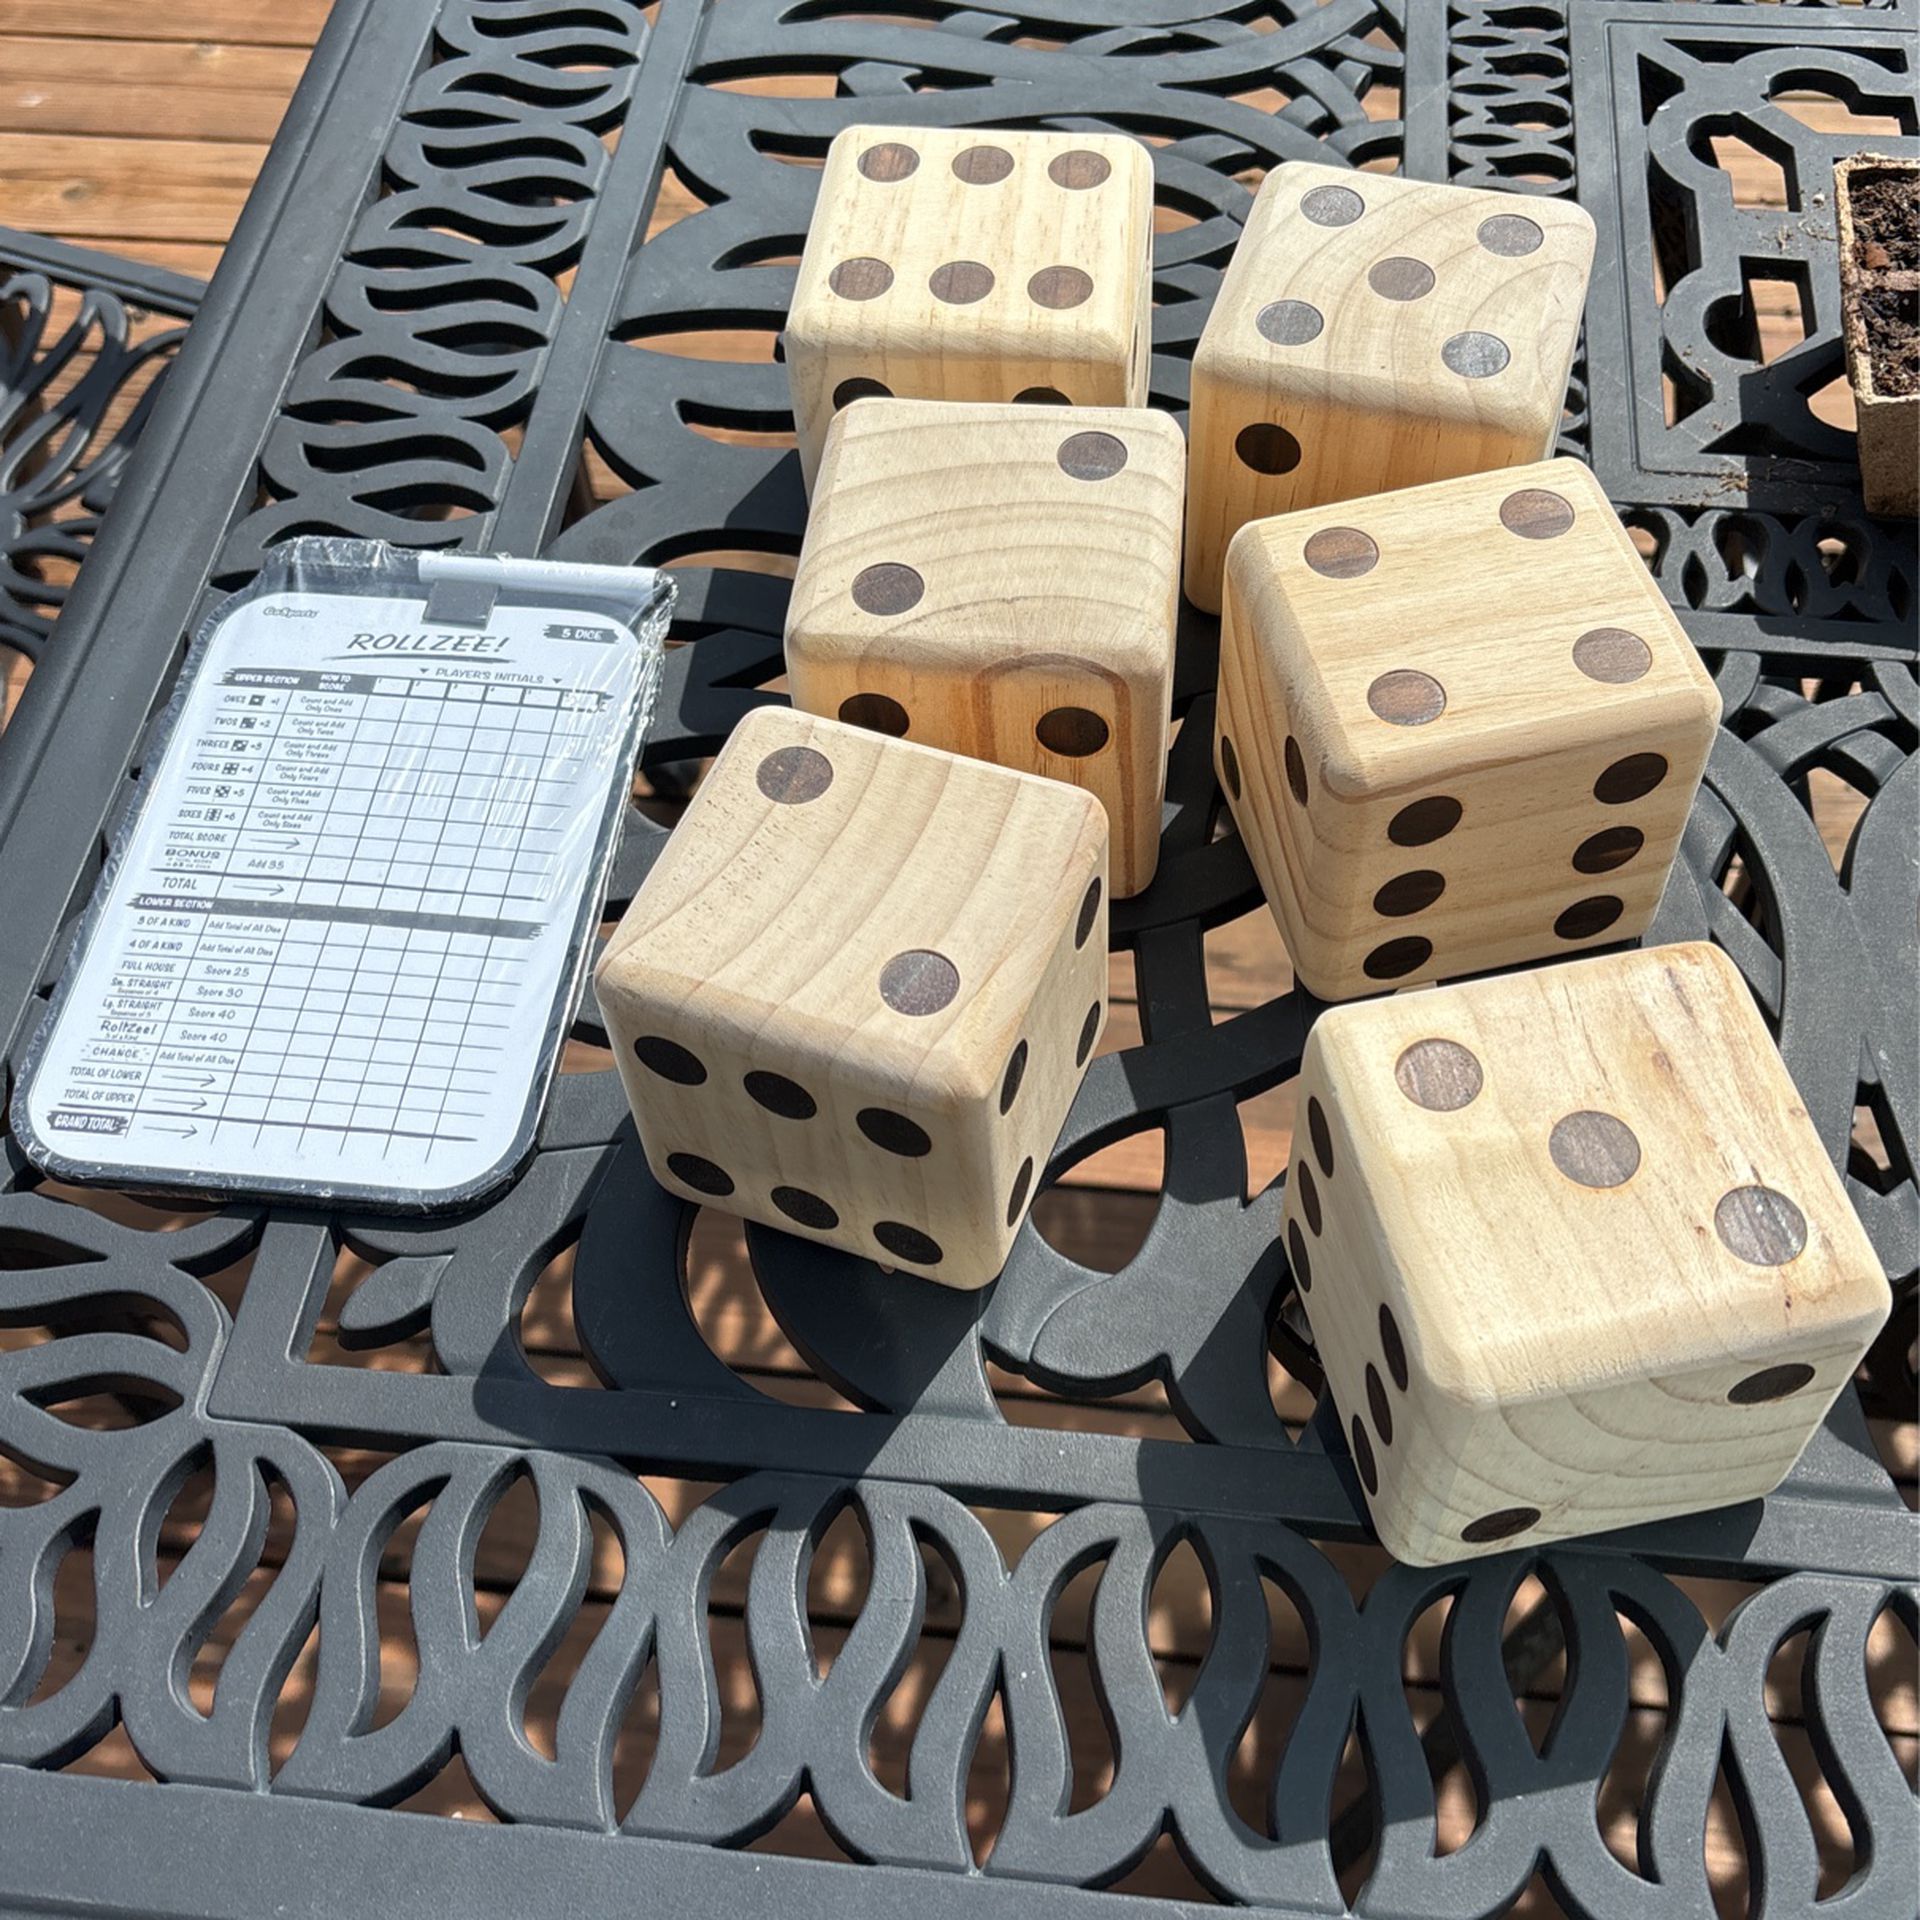 Giant Dice Game Set